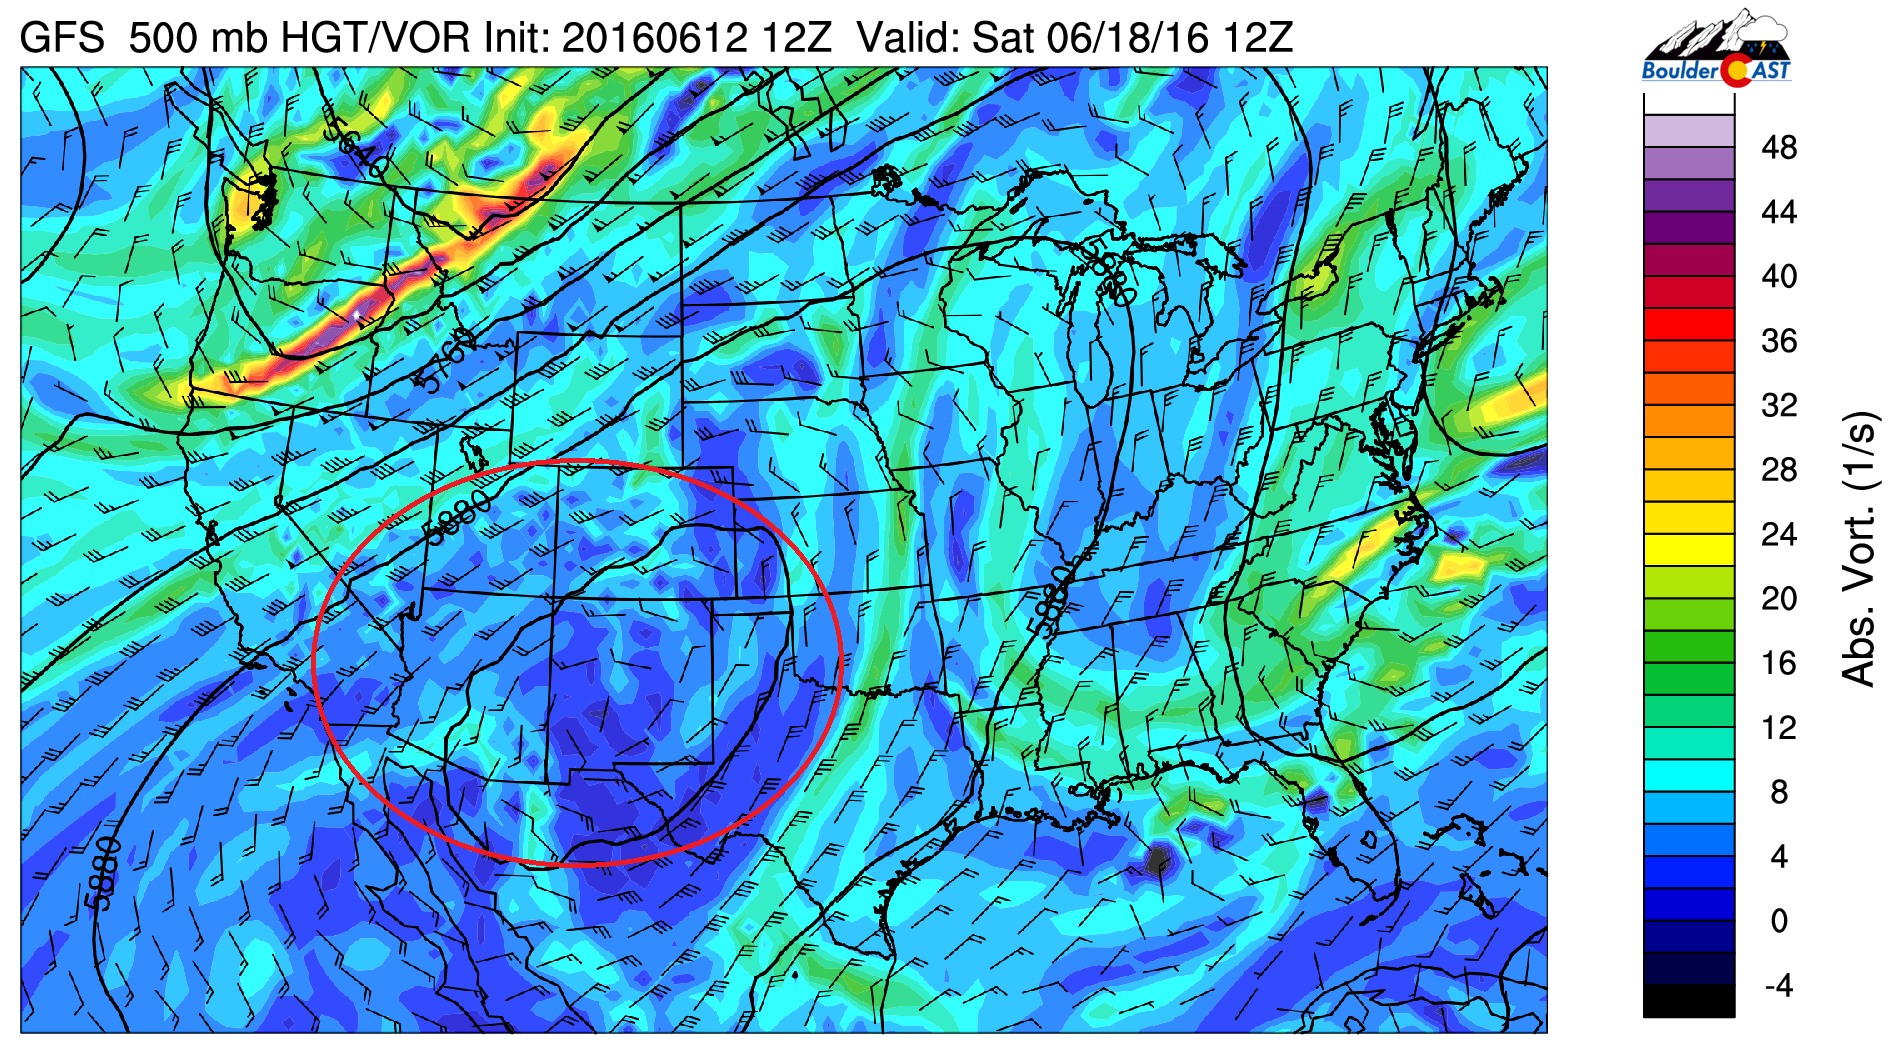 GFS 500 mb vorticity for the weekend